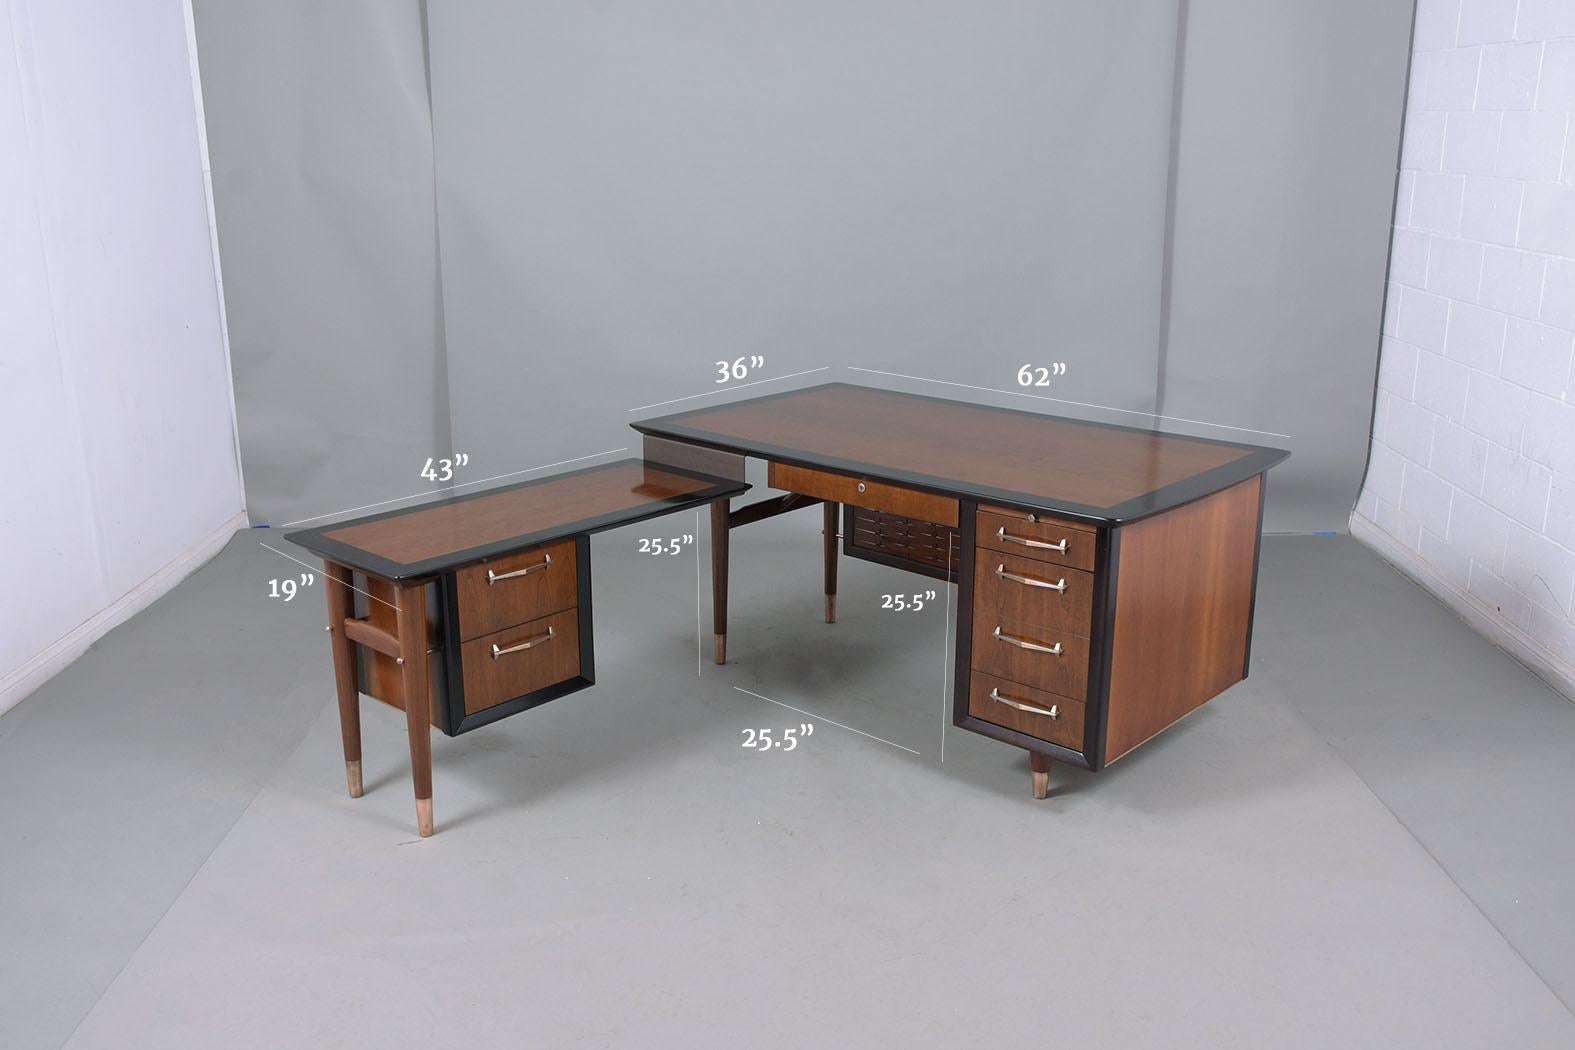 An extraordinary Mid-Century Modern 1960s desk crafted out of walnut wood professionally restored and finished by our craftsmen in the house. This piece has been newly stained in a provincial and ebonized color with a newly lacquered finish and